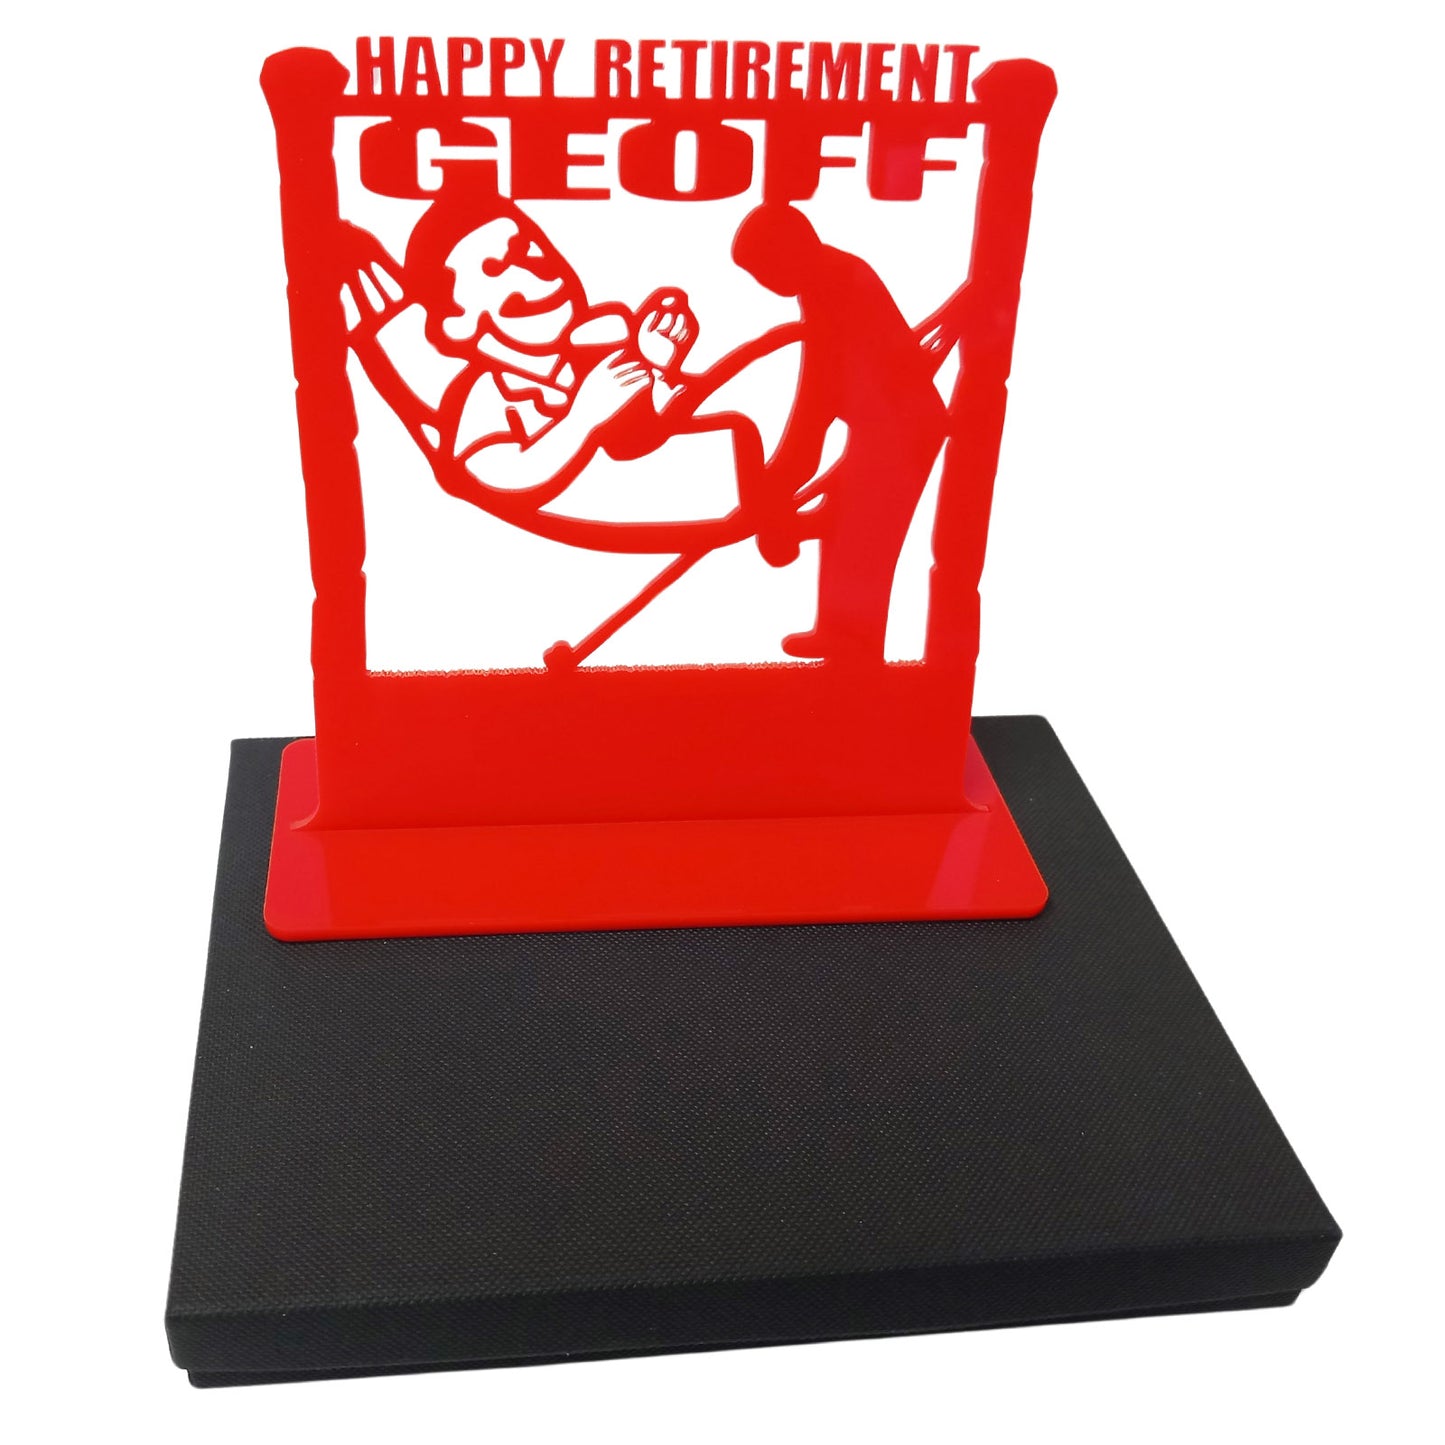 Acrylic personalised funny golf themed retirement gift ideas for golfers. Standalone keepsake ornaments.